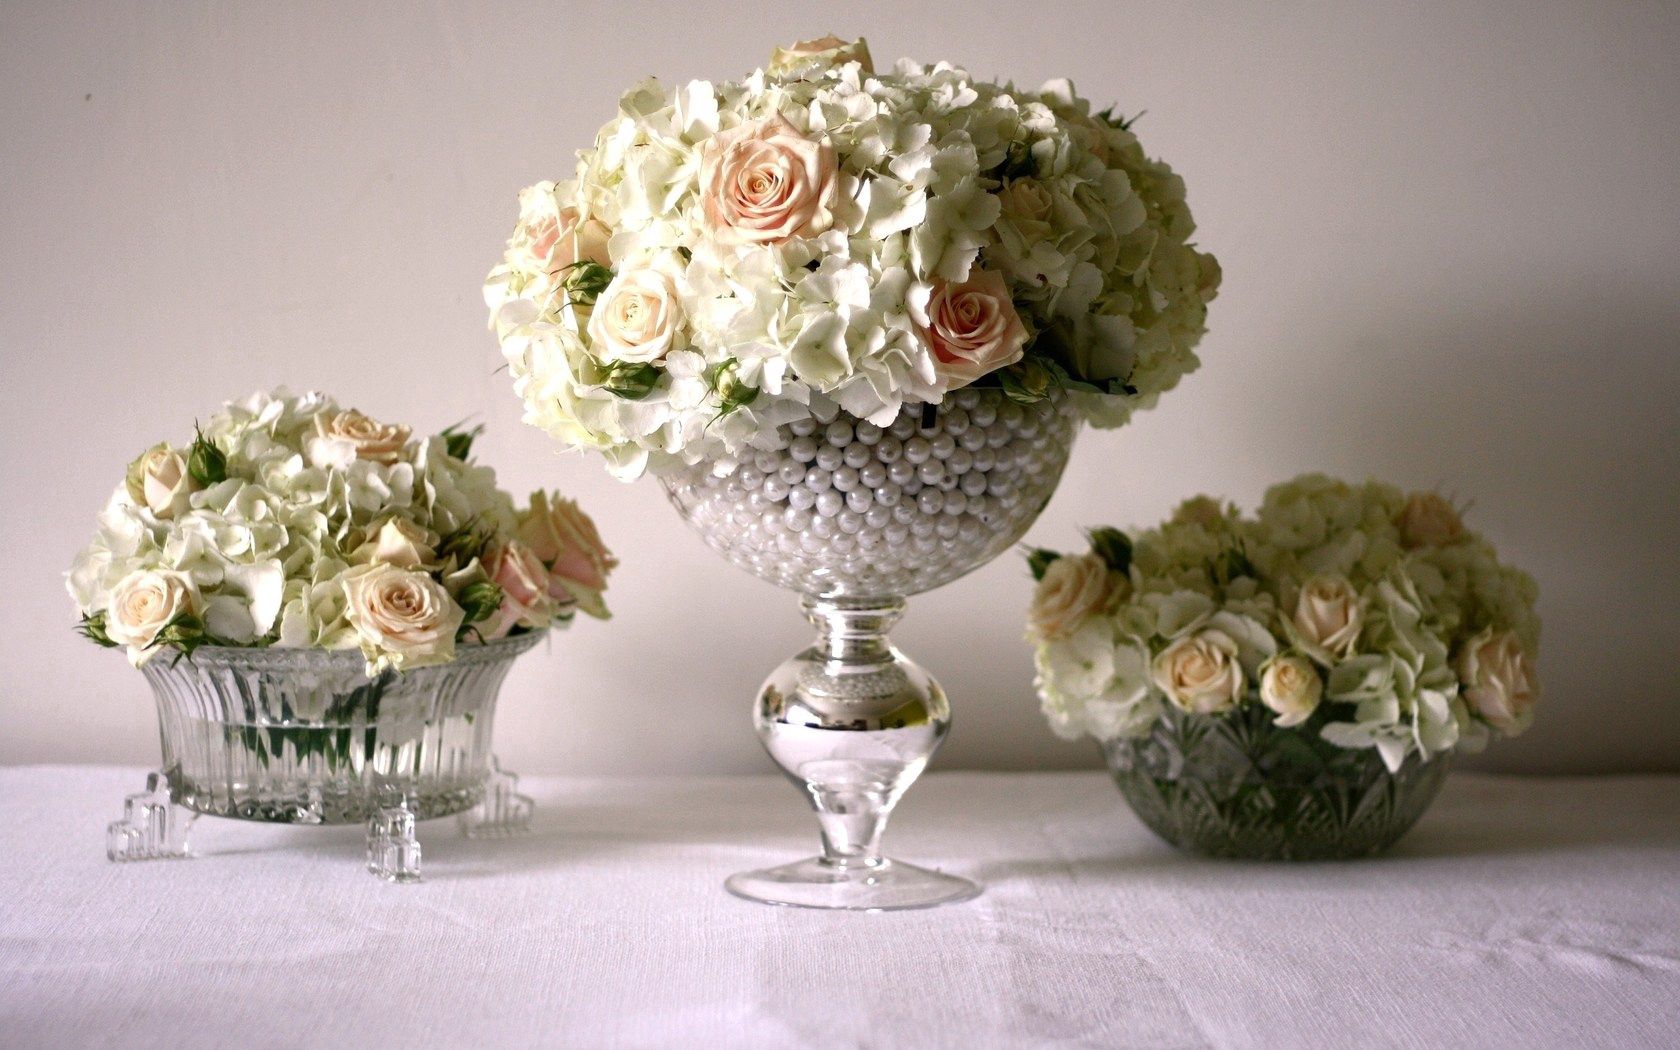 roses, bouquets, flowers, beauty, tenderness, vases